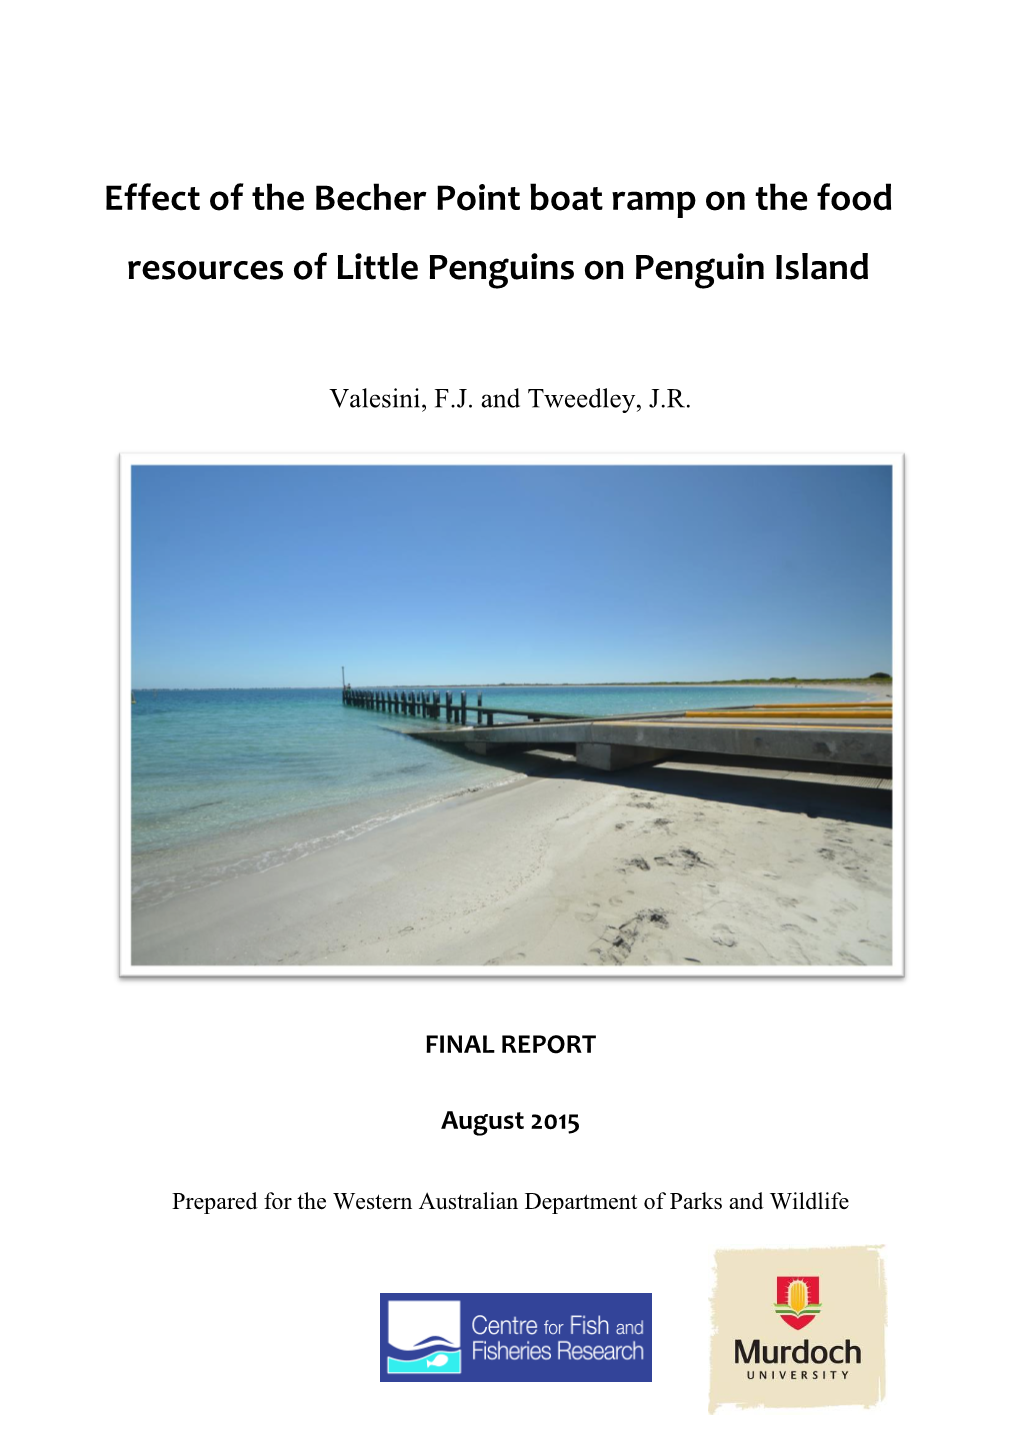 Effect of the Becher Point Boat Ramp on the Food Resources of Little Penguins on Penguin Island